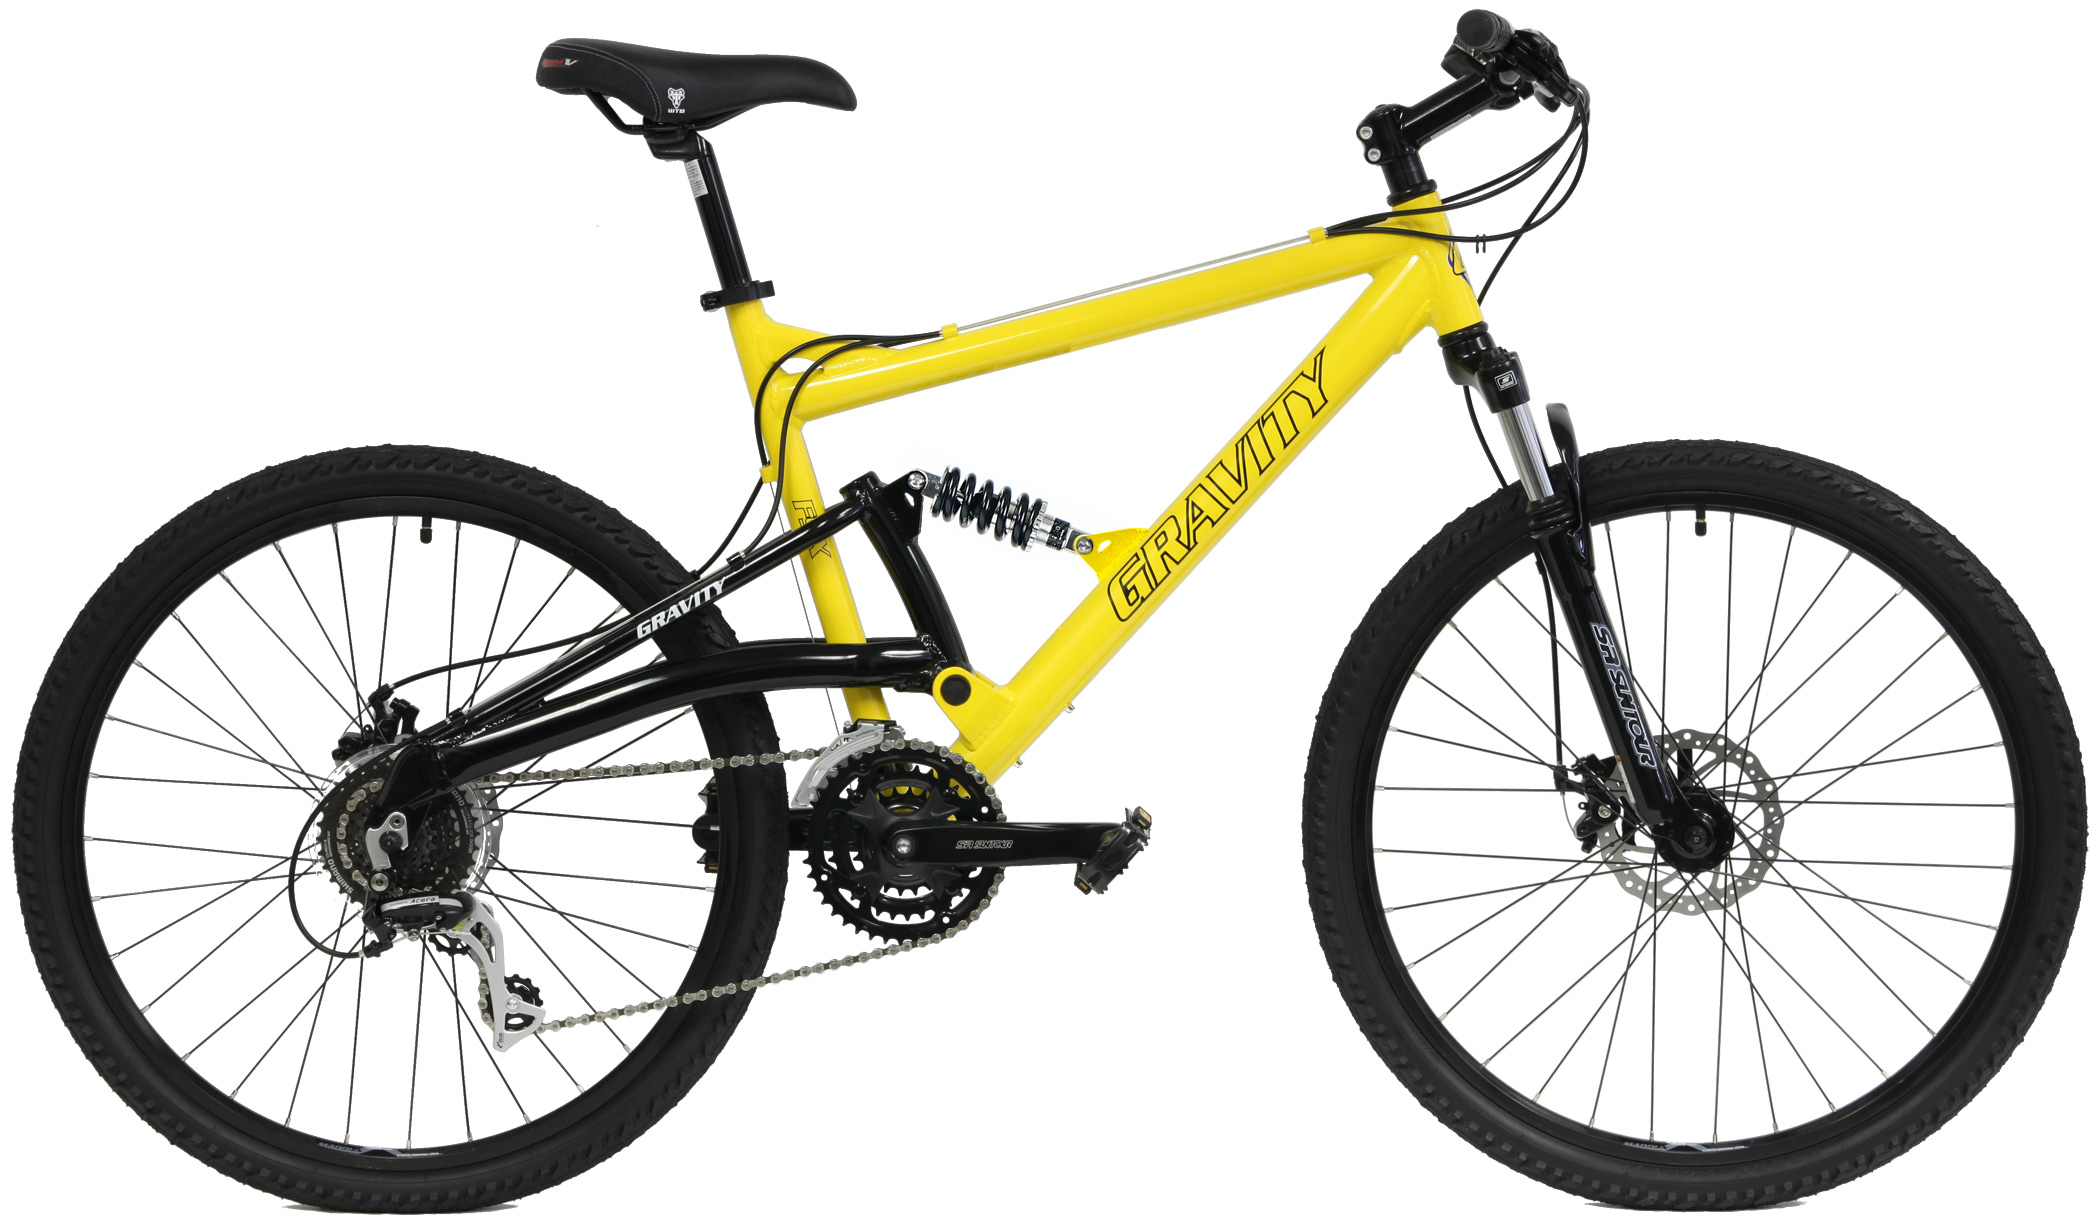 Save up to 60% off new Mountain Bikes - MTB - Full Suspension Gravity